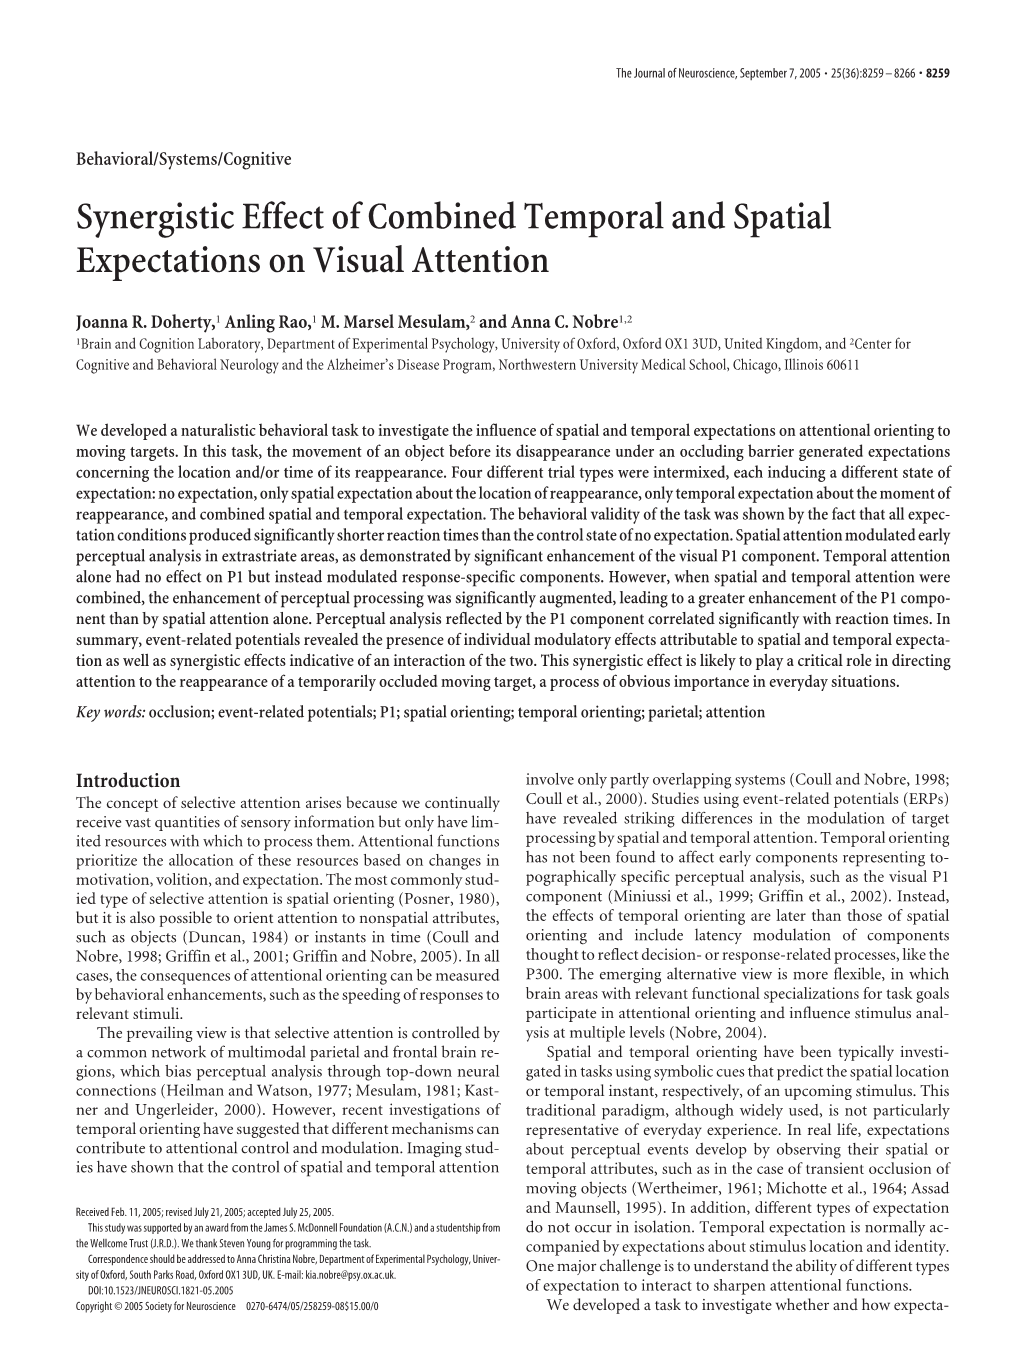 Synergistic Effect of Combined Temporal and Spatial Expectations on Visual Attention